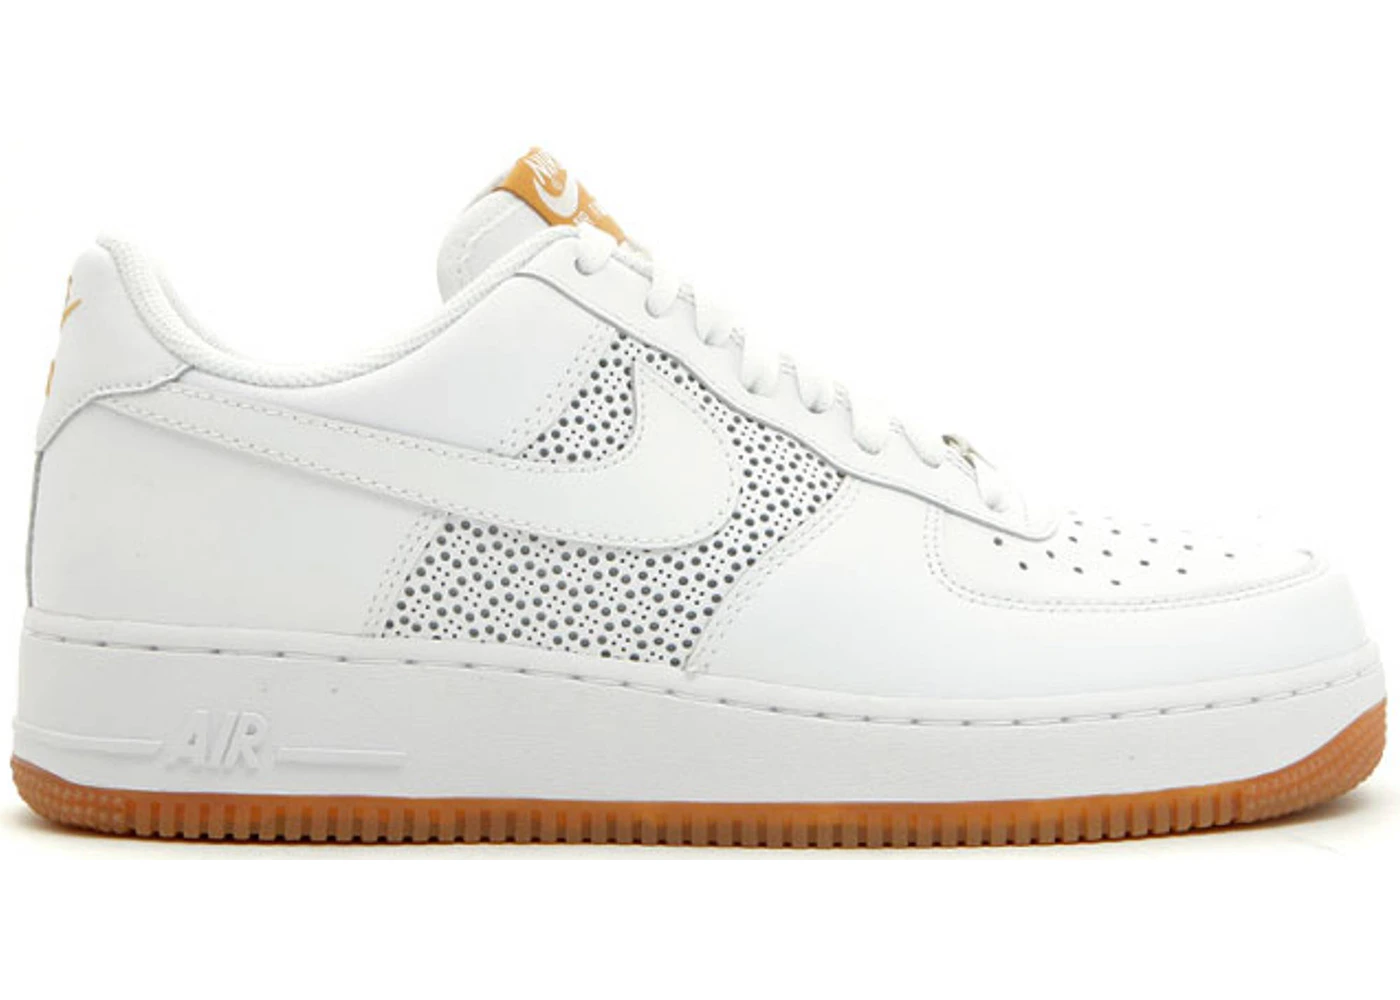 Nike Air Force 1 Low Perforated Sidepanels White Gum Men's